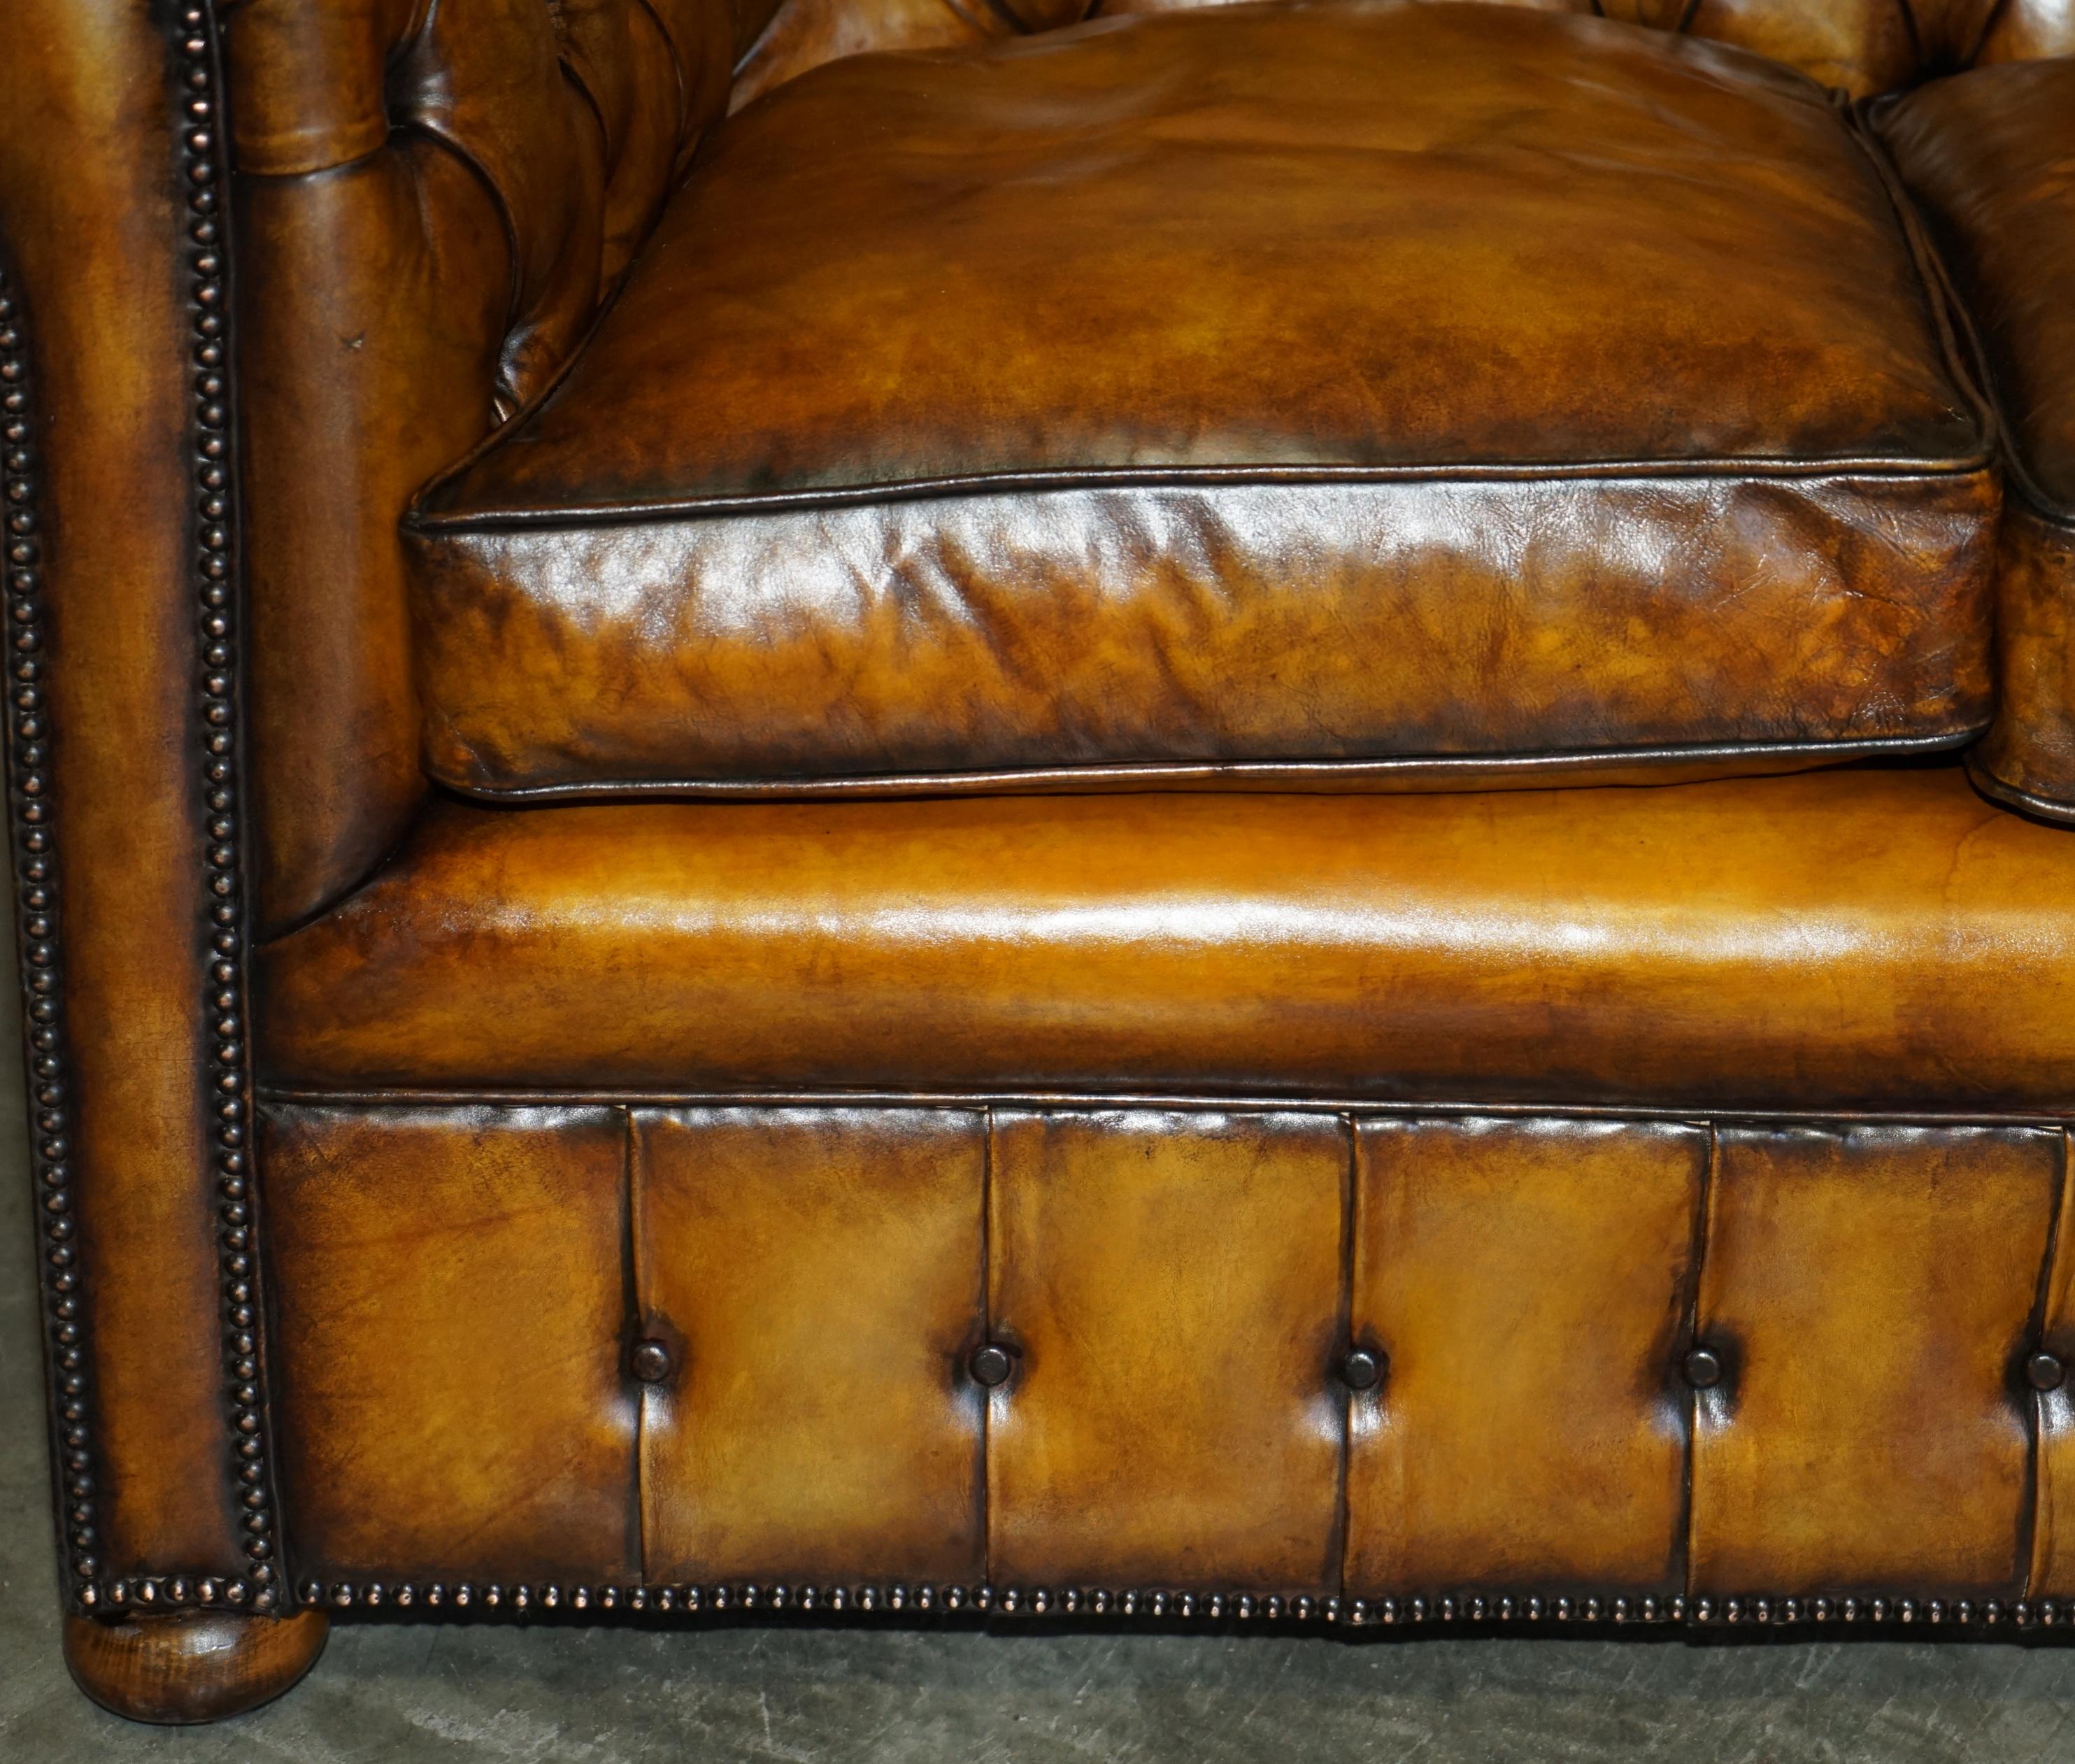 Hand-Crafted SUPER RARE FULLY RESTORED ViNTAGE CIGAR BROWN LEATHER CHESTERFIELD SOFA PART SET For Sale